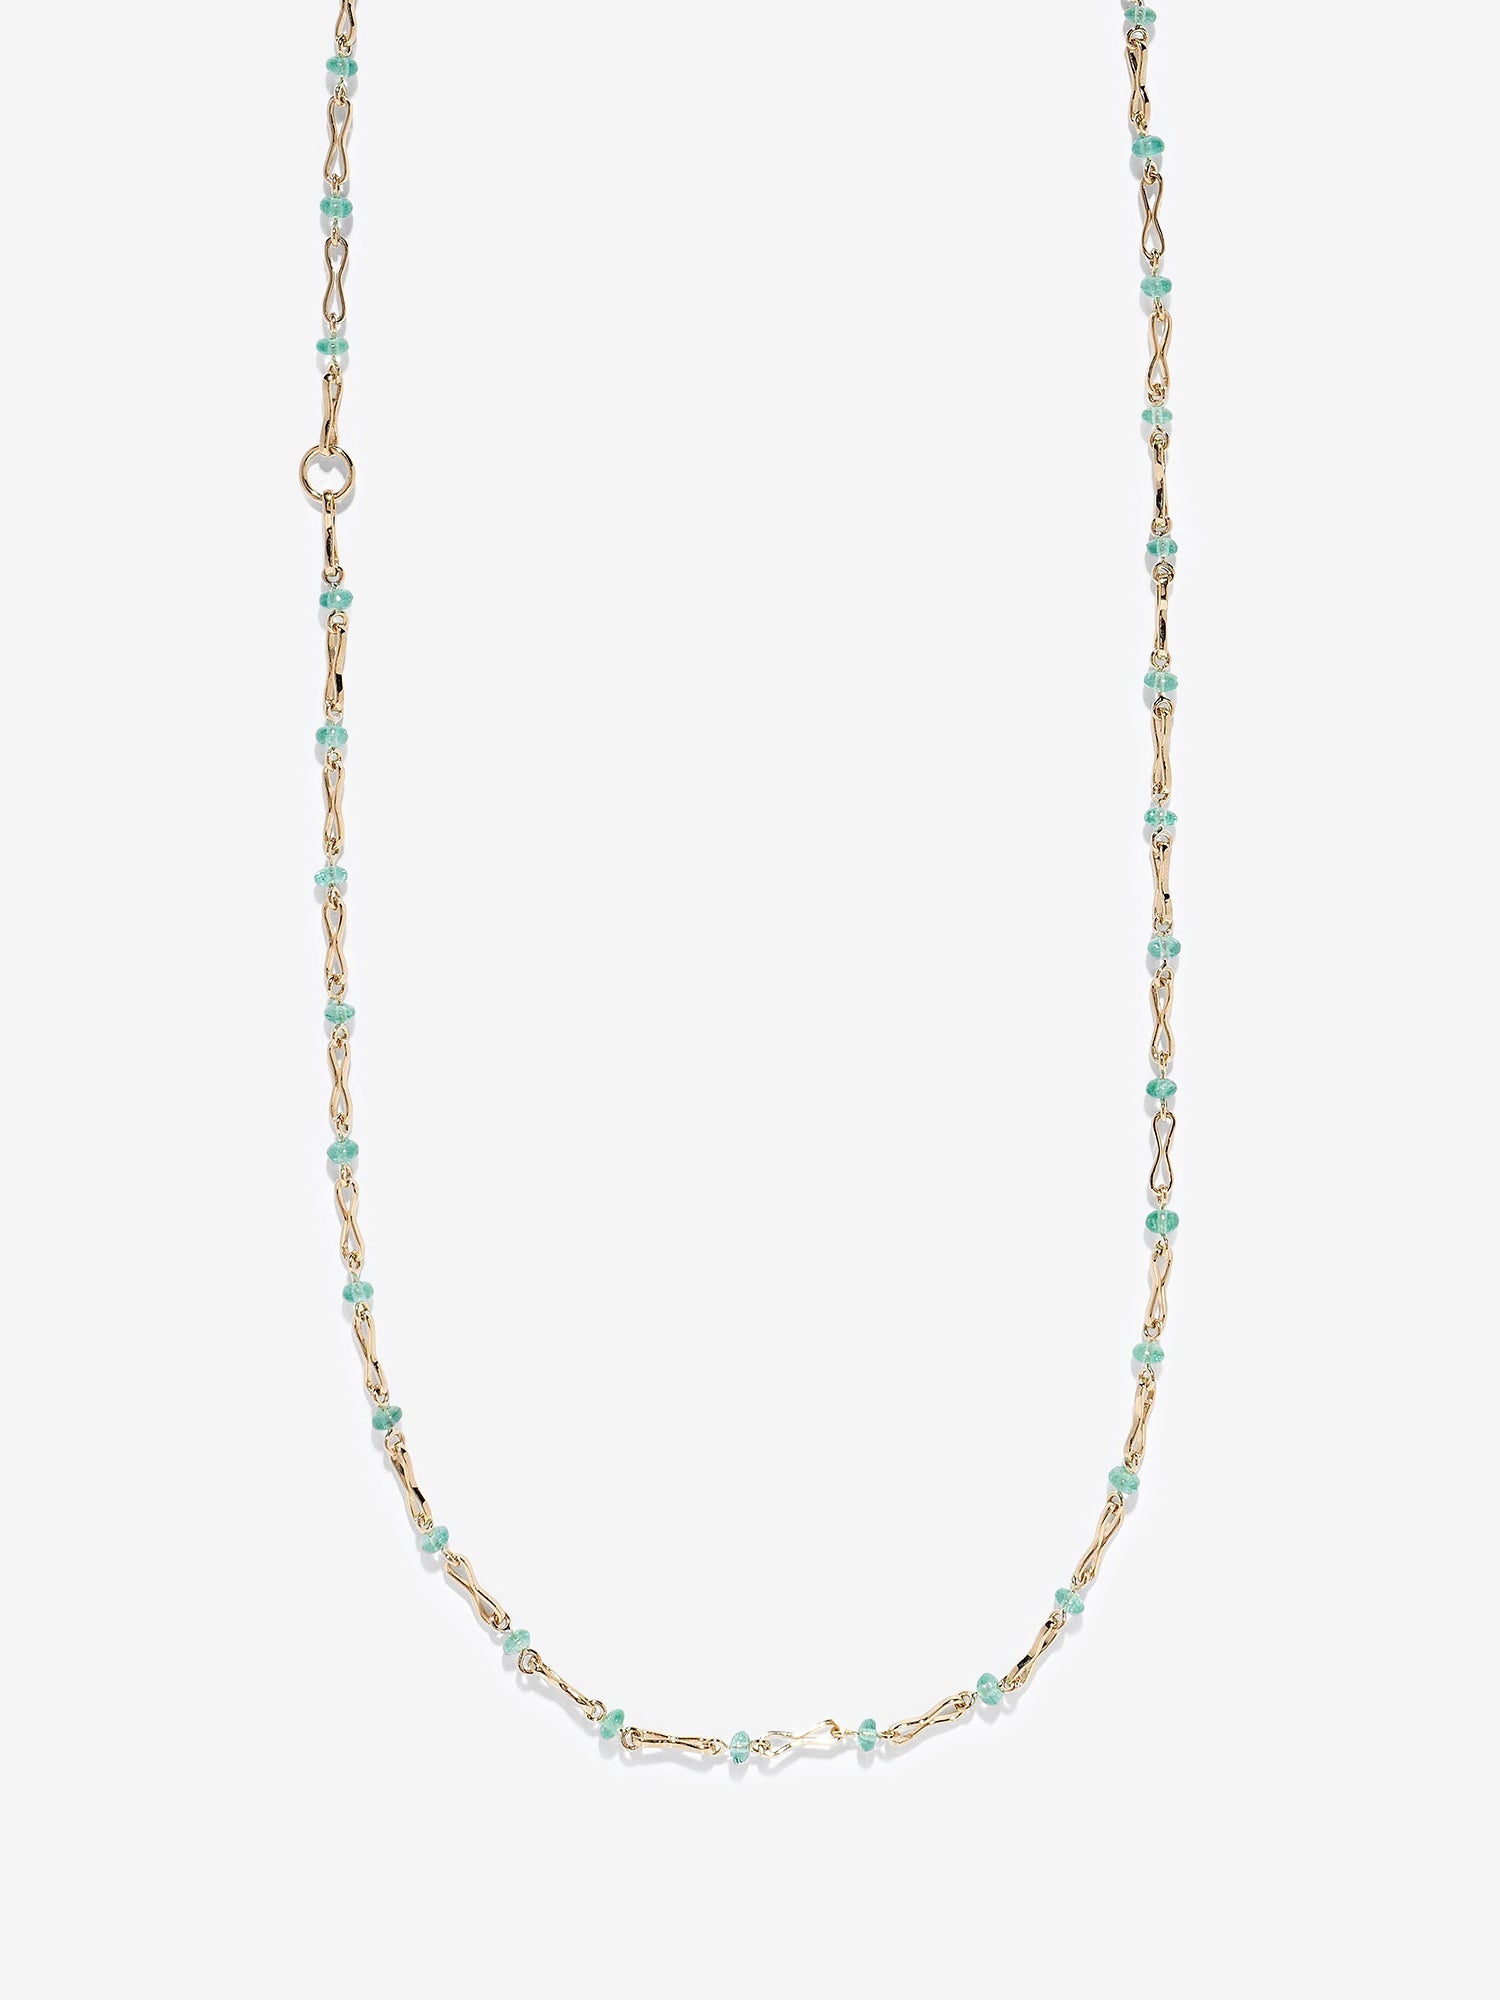 Small Handmade Gold and Emerald Necklace